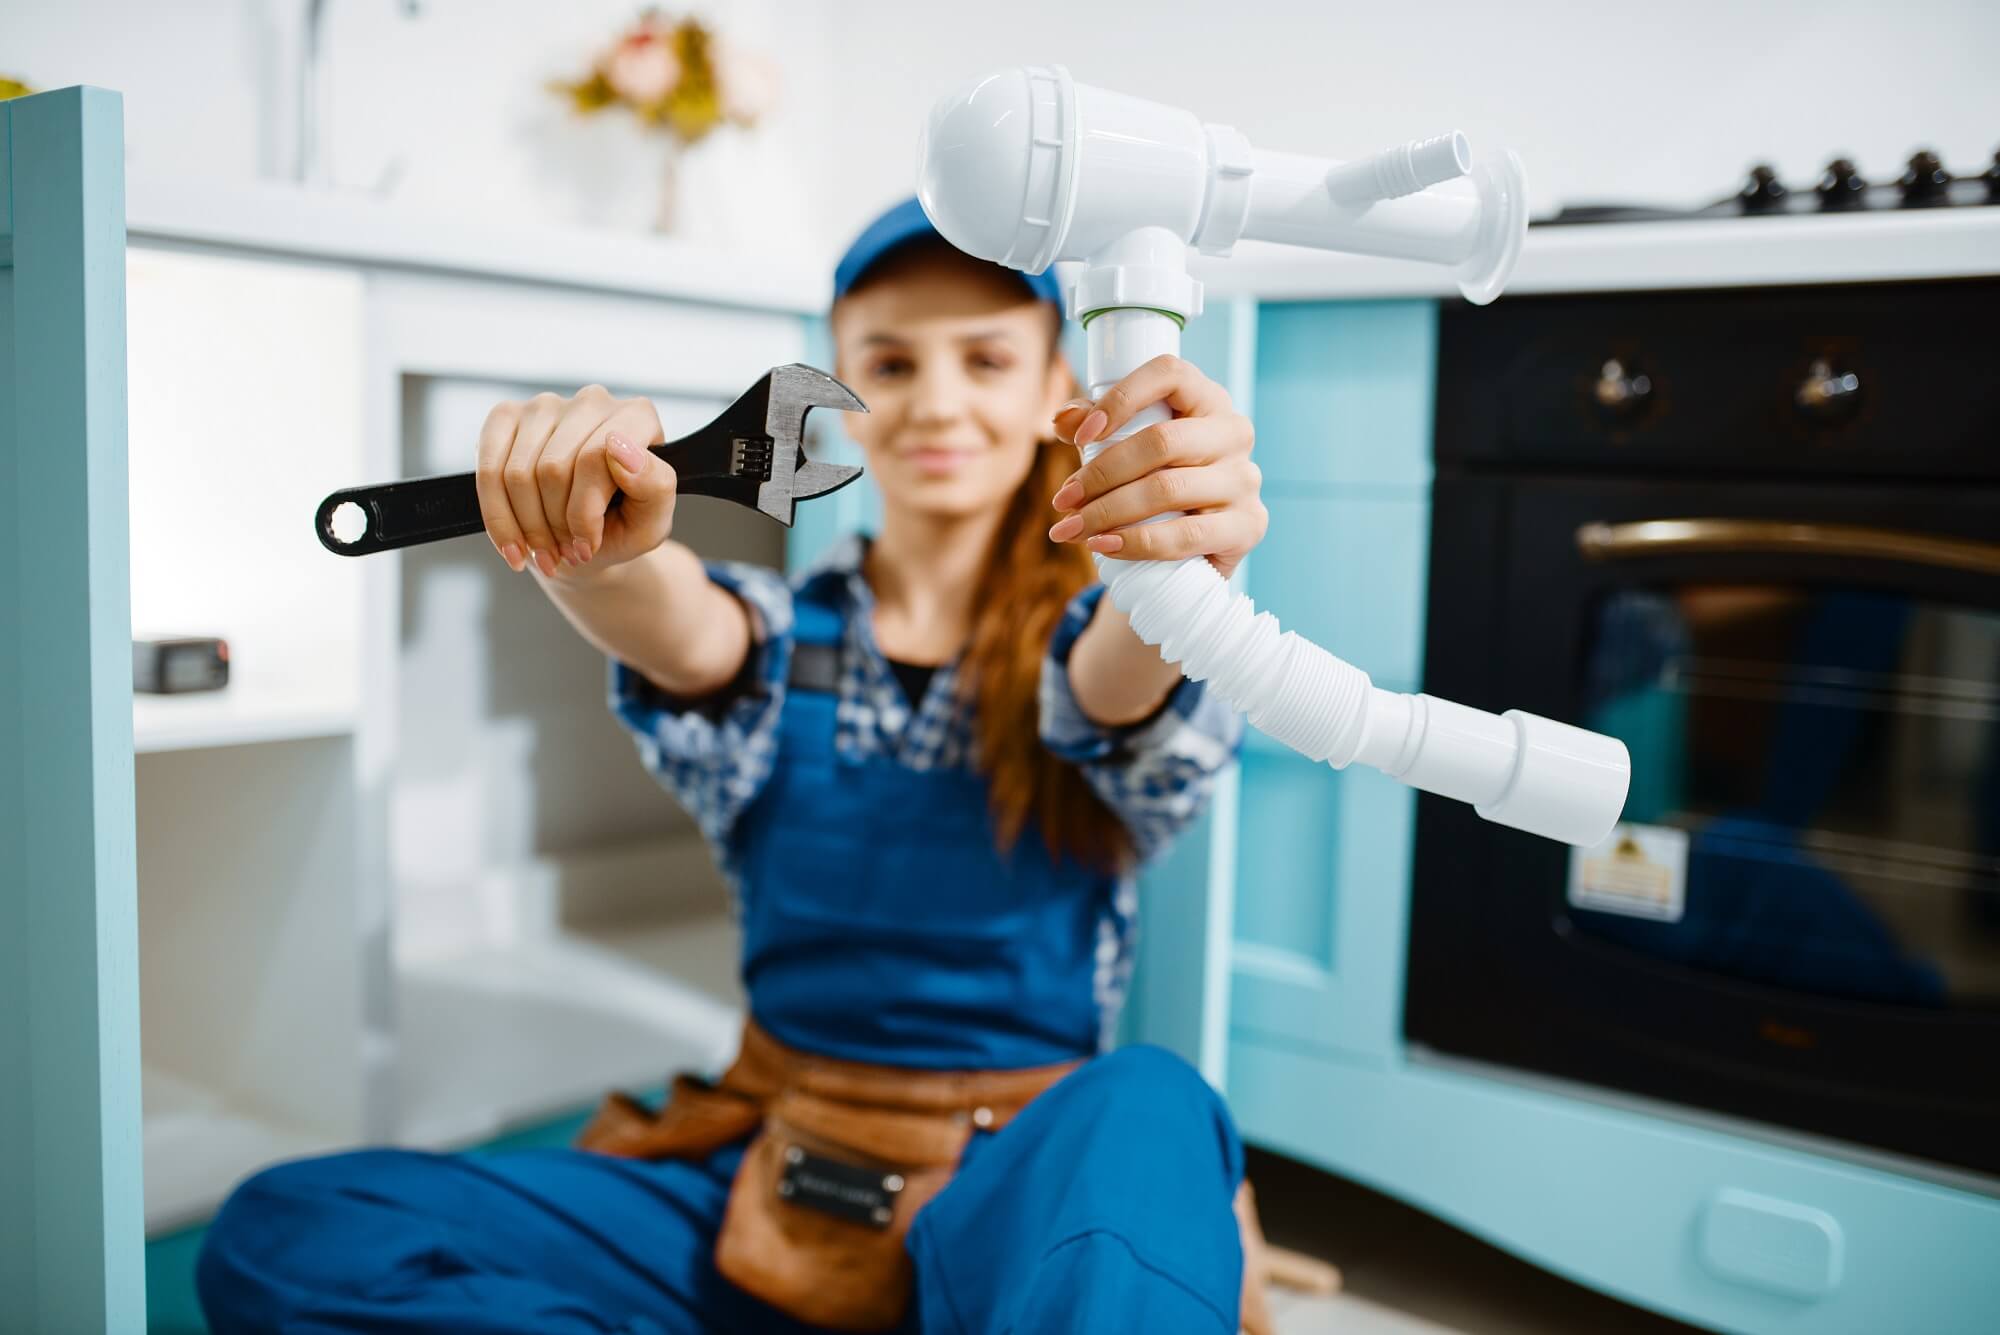 A young female plumber in uniform shows a wrench and pipe in the kitchen.